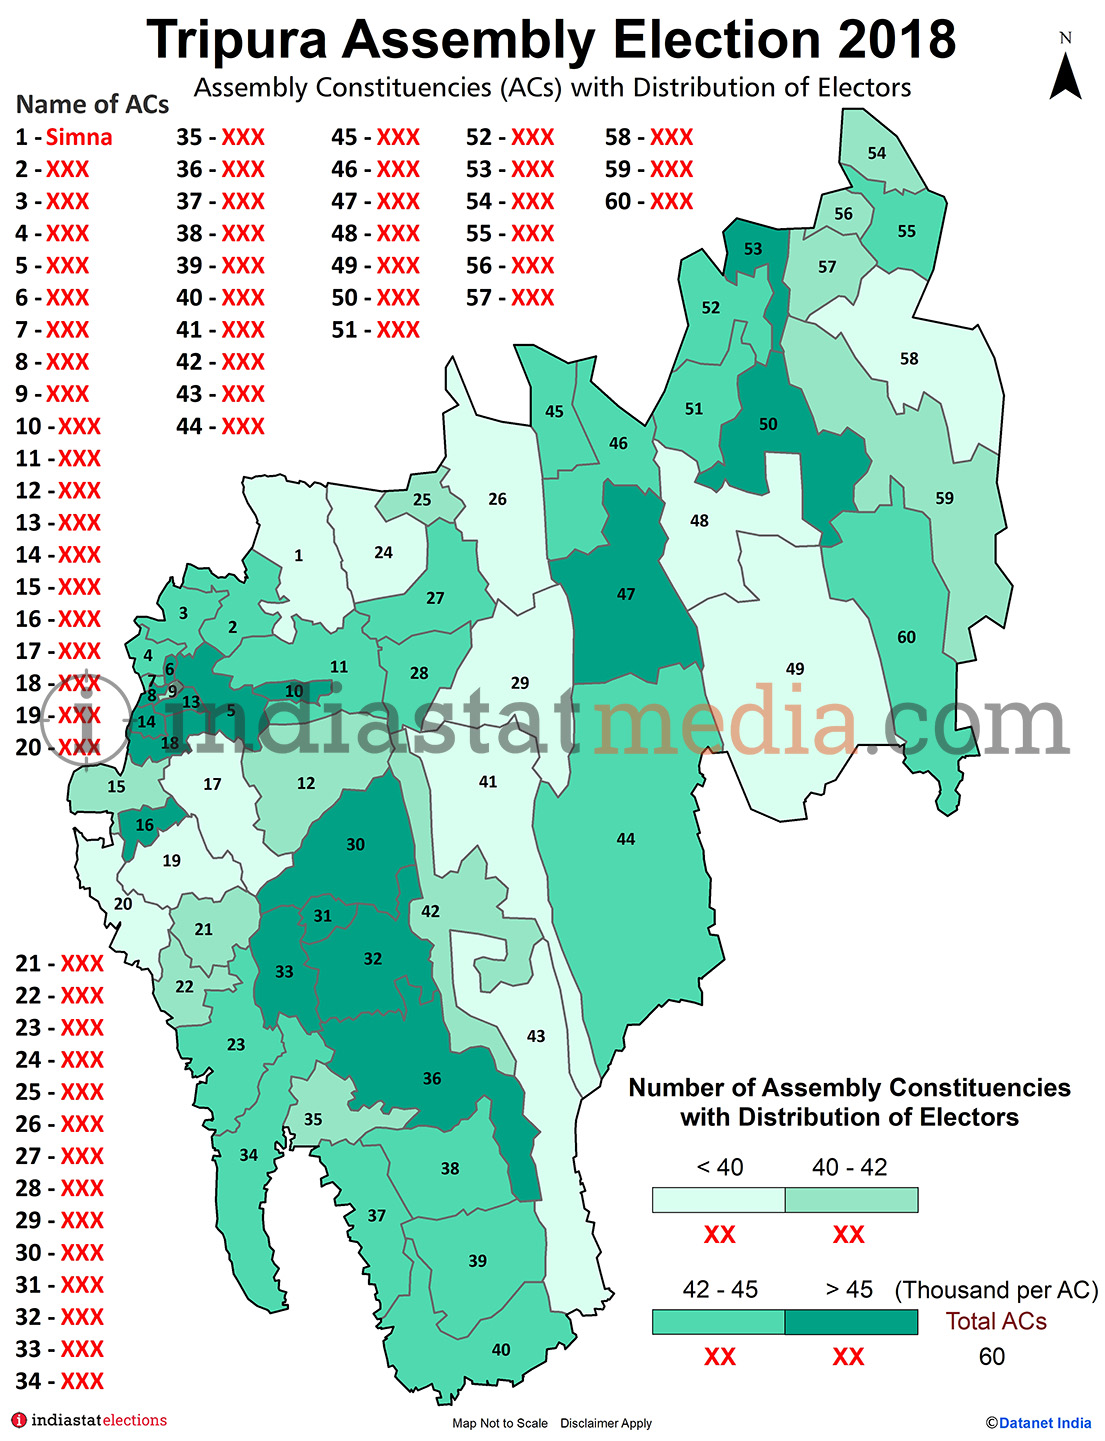 Assembly Constituencies (ACs) with Distribution of Electors in Tripura (Assembly Election - 2018)